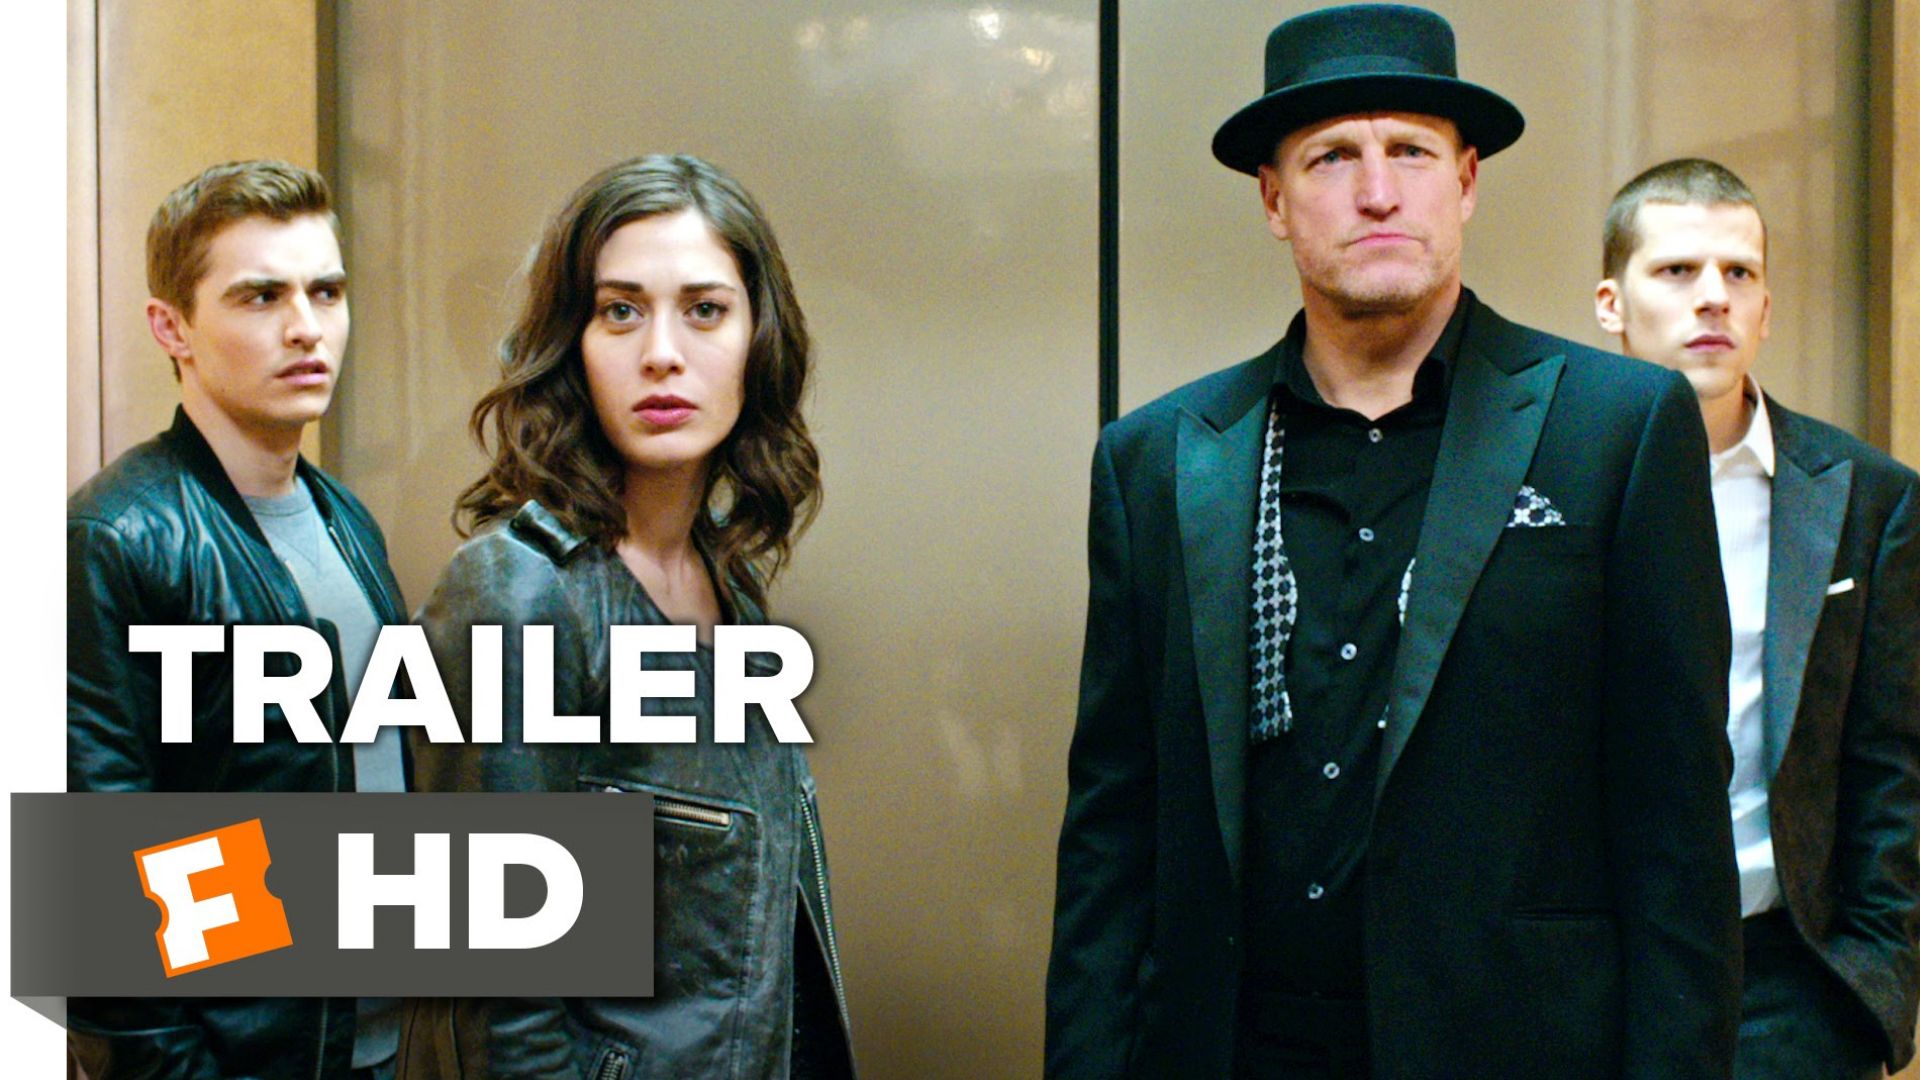 Now You See Me 2 - Official Trailer #1 (Woody Harrelson, Dan